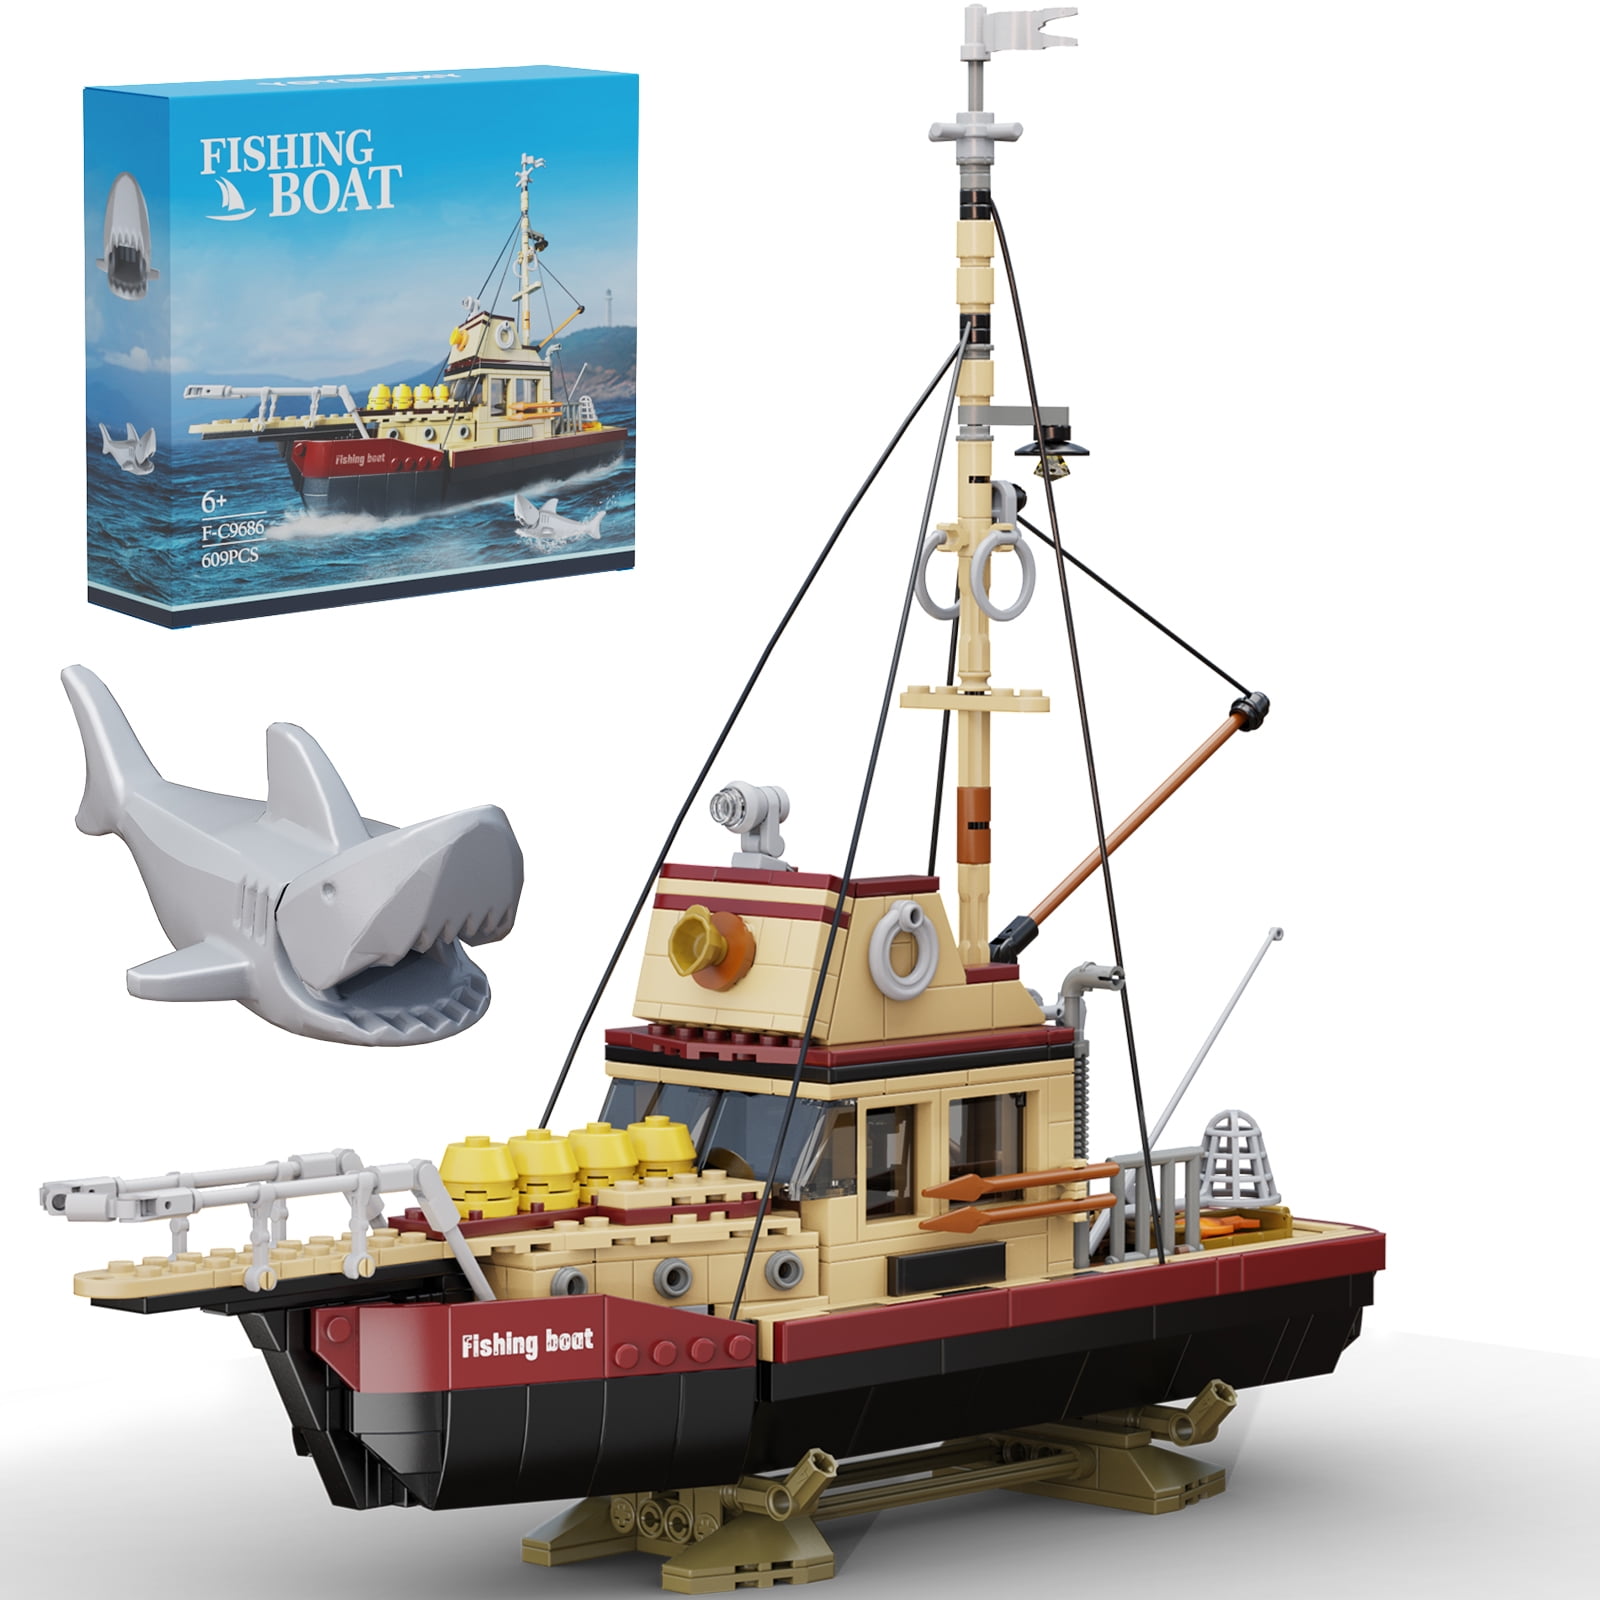 LEGO Ideas Old Fishing Store 21310 Building Set (2,049 Pieces